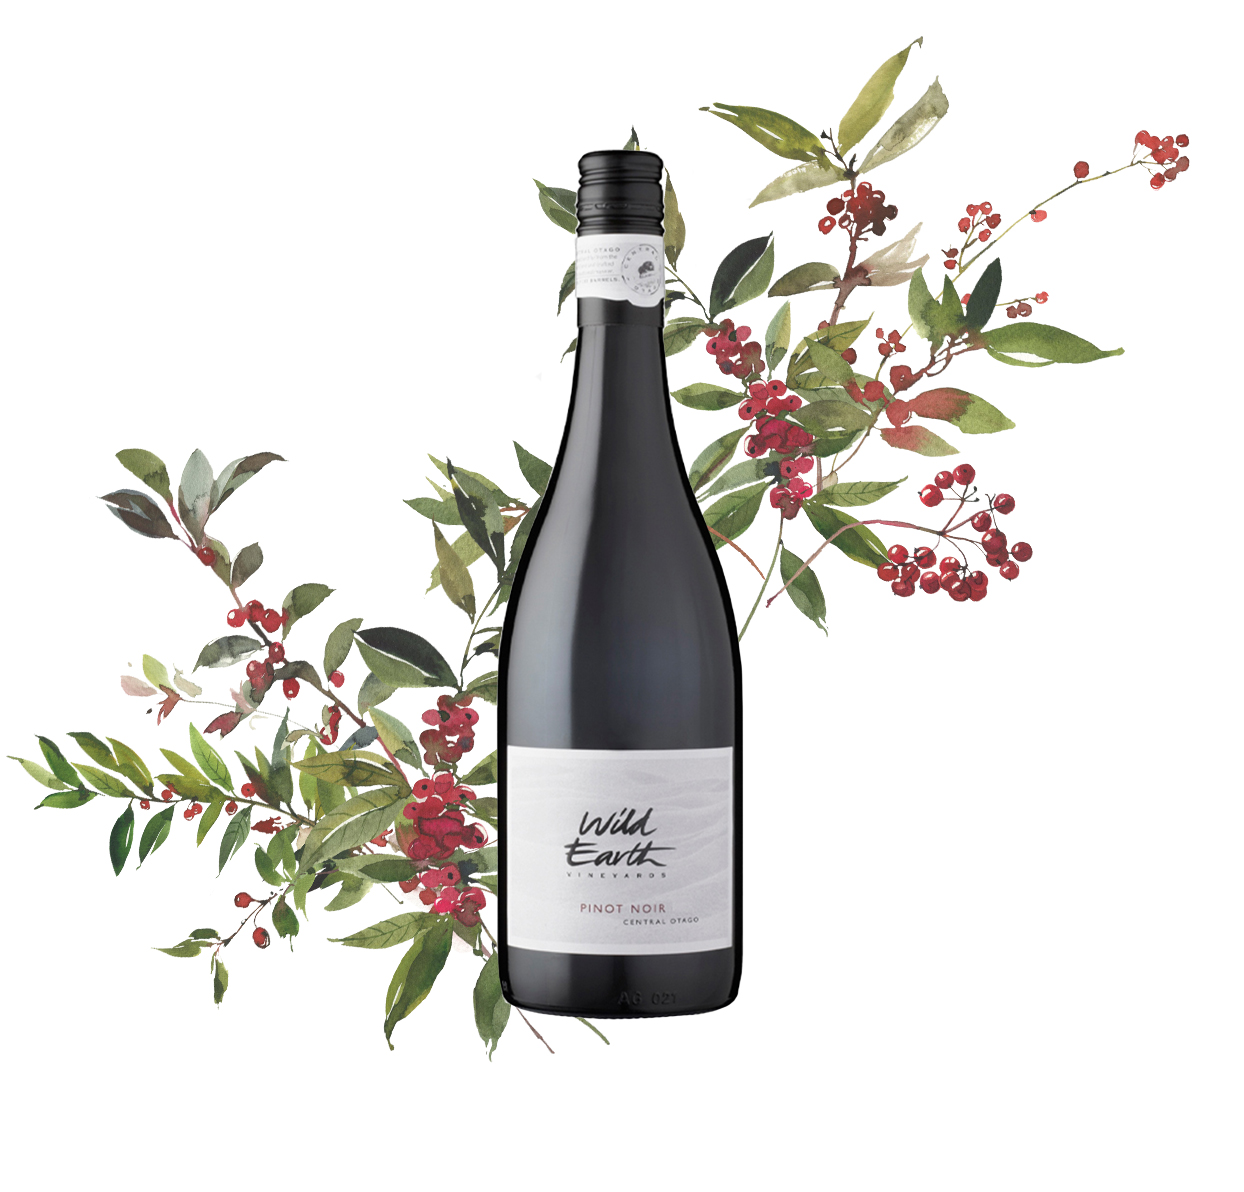 2018 Central Otago Pinot Noir with grape and leaf decorations in reds and greens